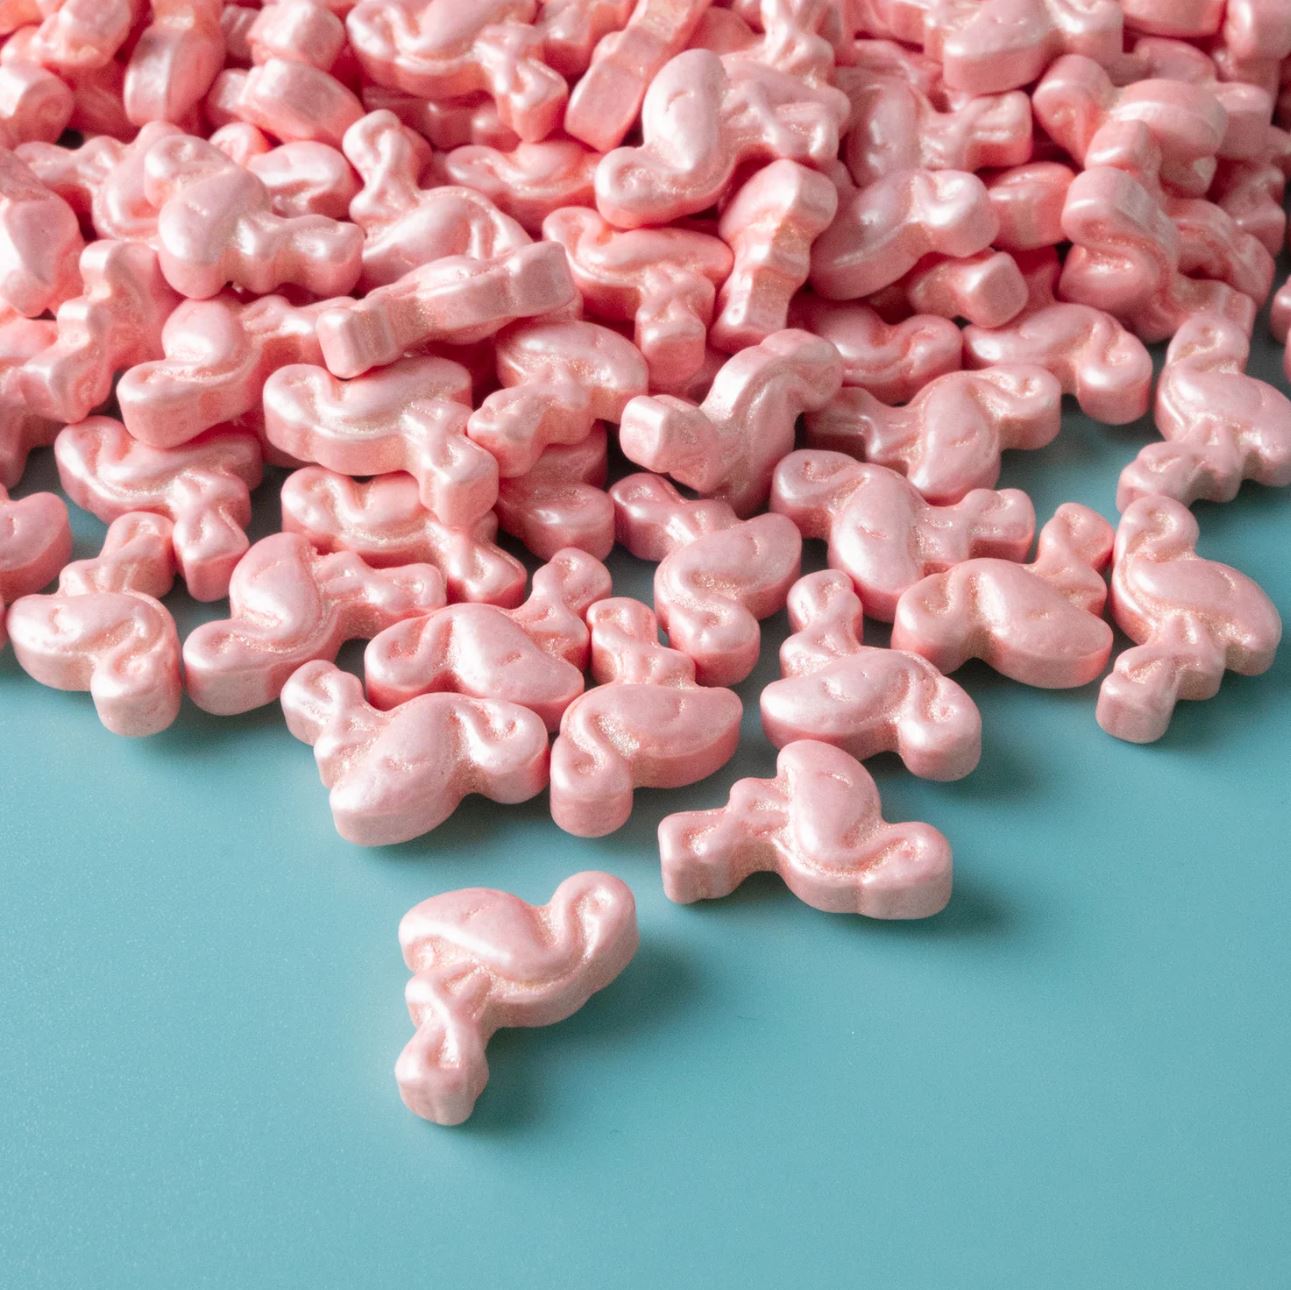 Pearl Flamingo Candy Topping